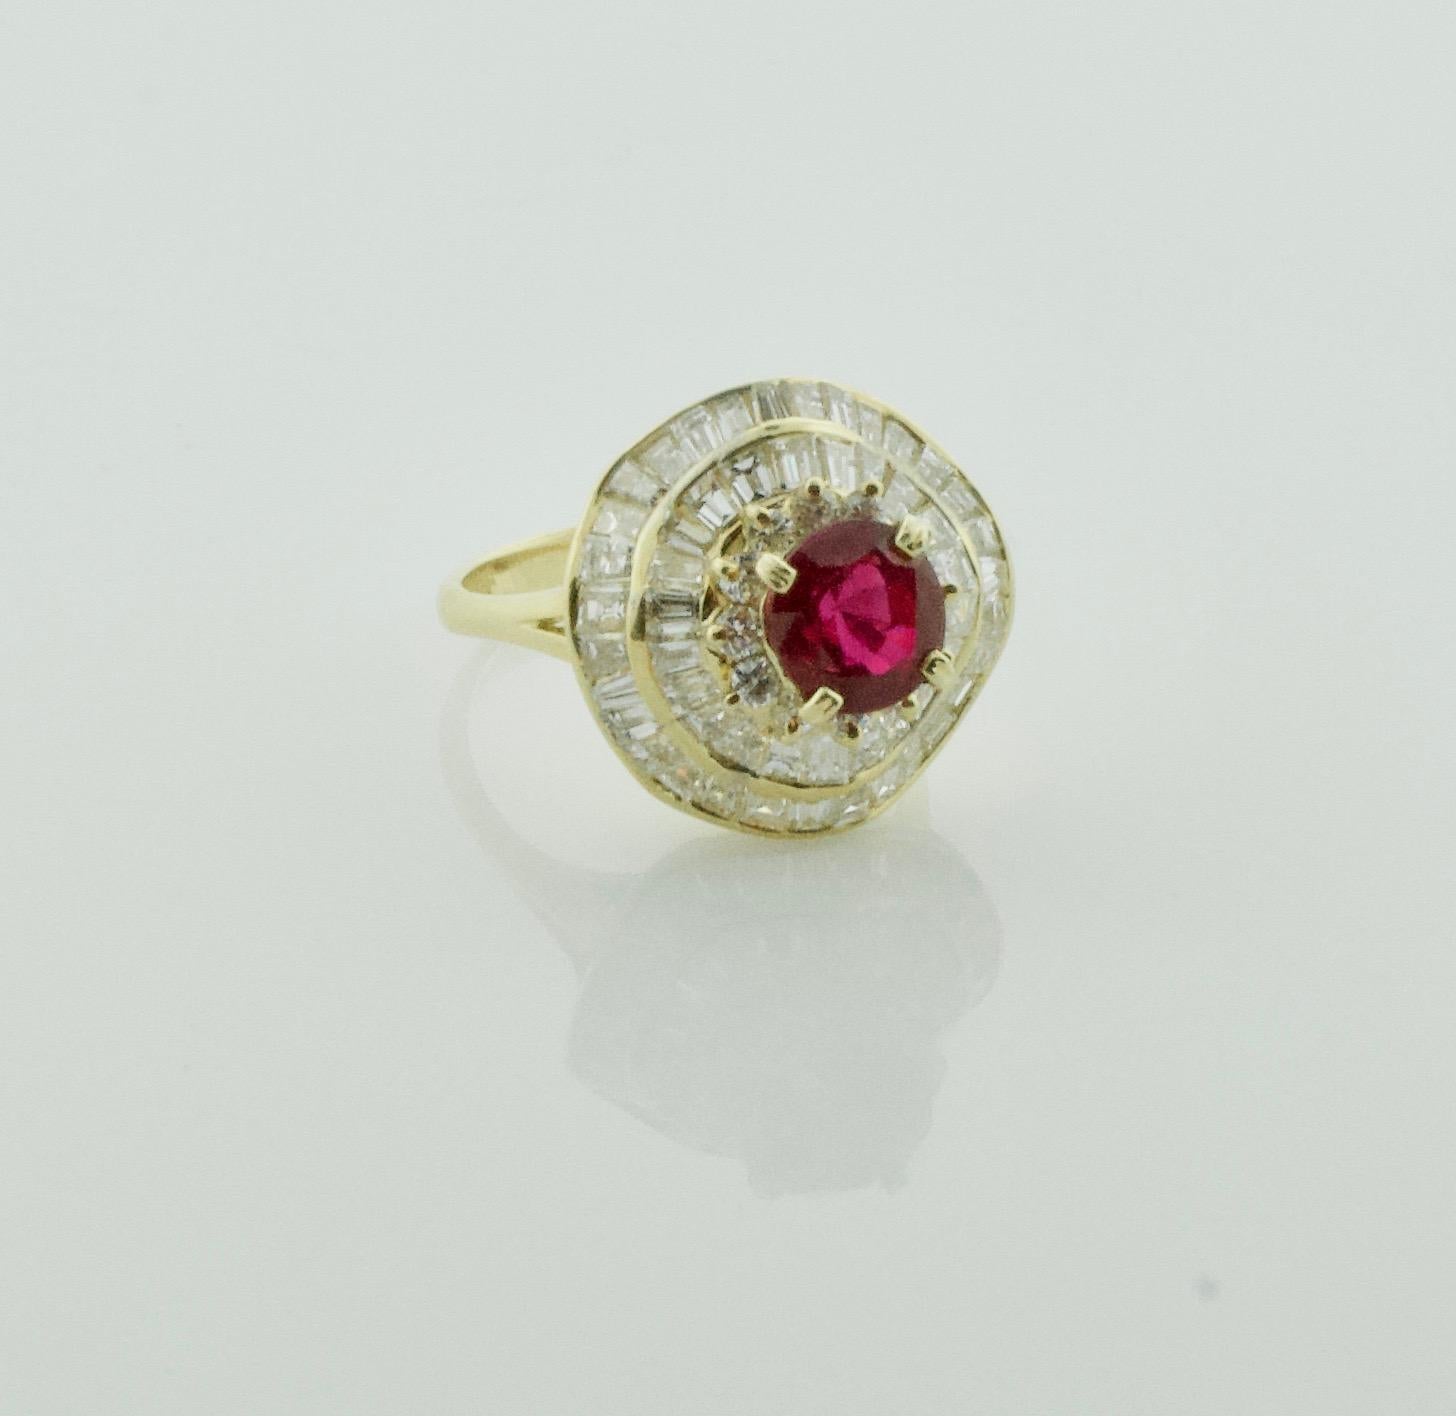 Ruby and Diamond Modern Pretty Ballerina Ring in 18k
One Round Cut Ruby Weighing 1.78 Carats 
Fifty Three Tapered Baguette  Cut Diamonds Weighing 2.28 Carats
Twelve  Round Brilliant Cut Diamonds Weighing .31 Carats 
2.59 Total Diamond Weight  